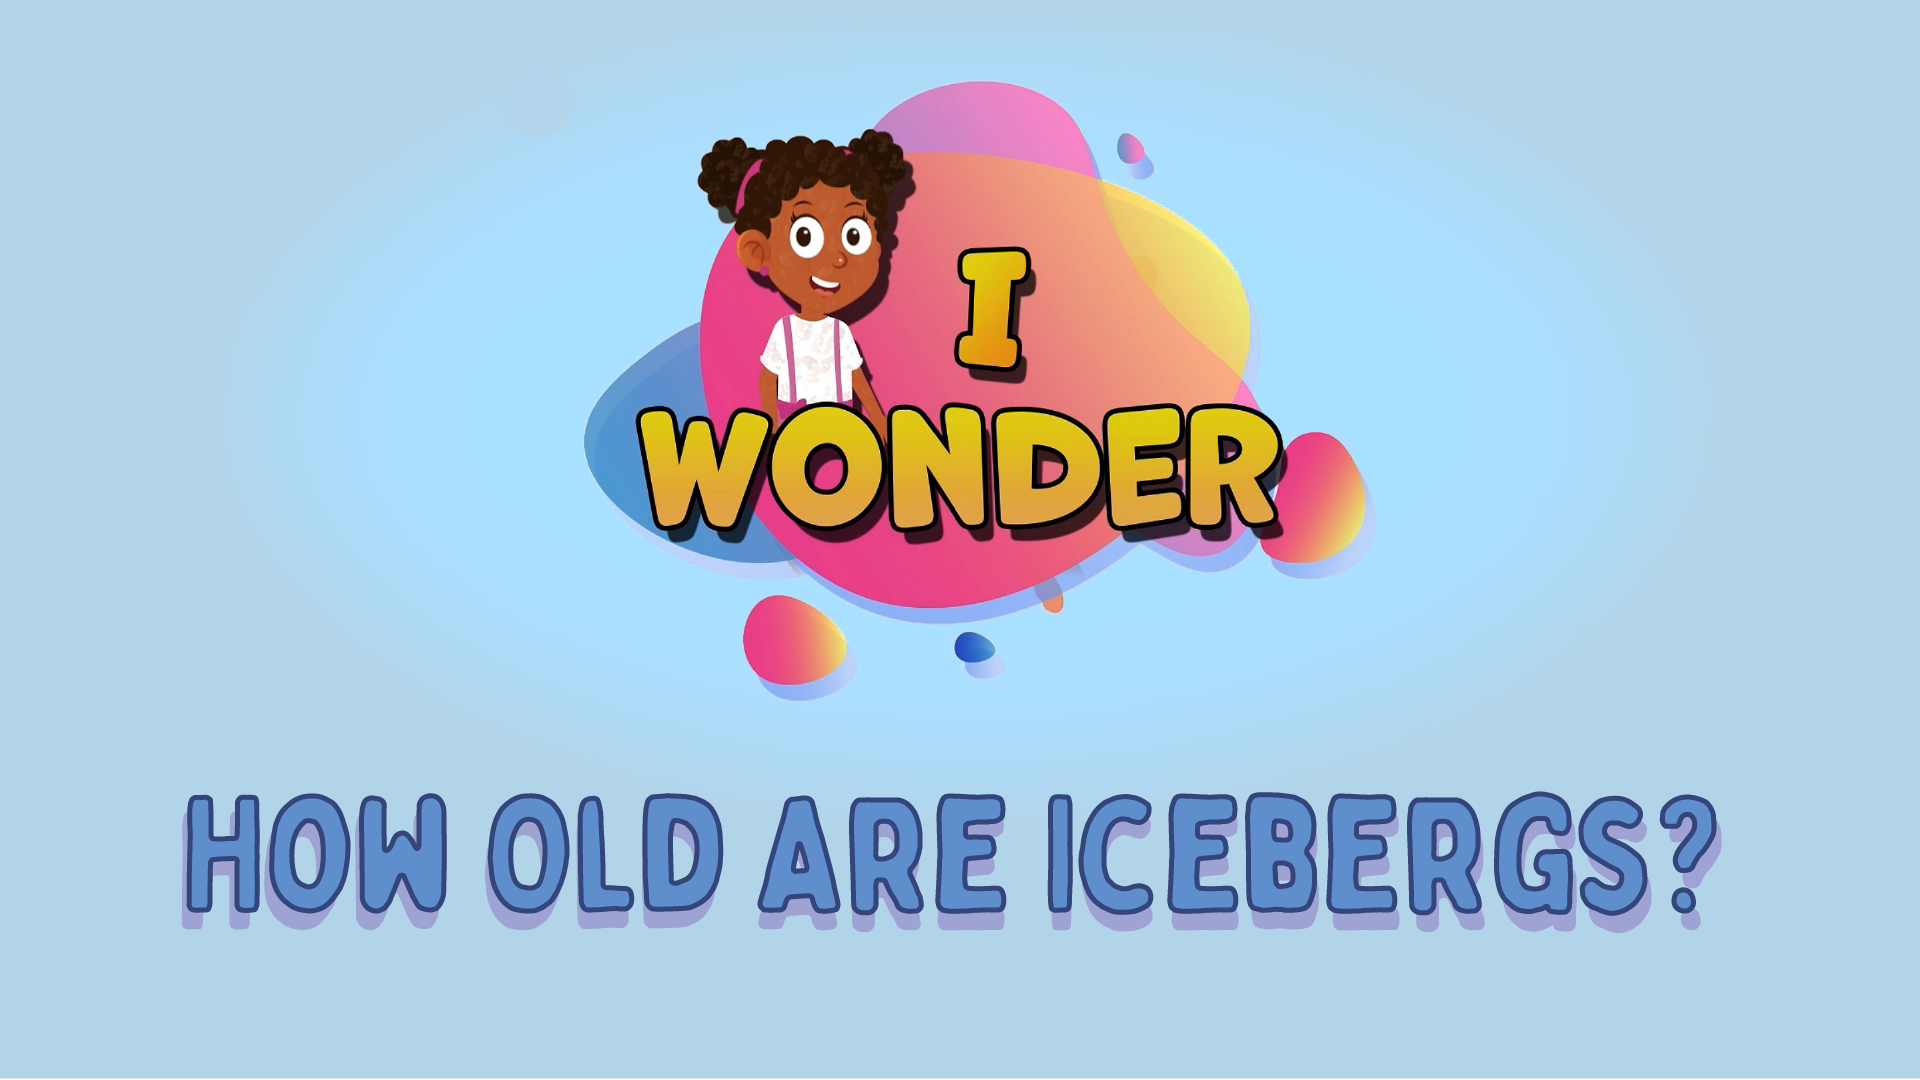 How Old Are Icebergs?